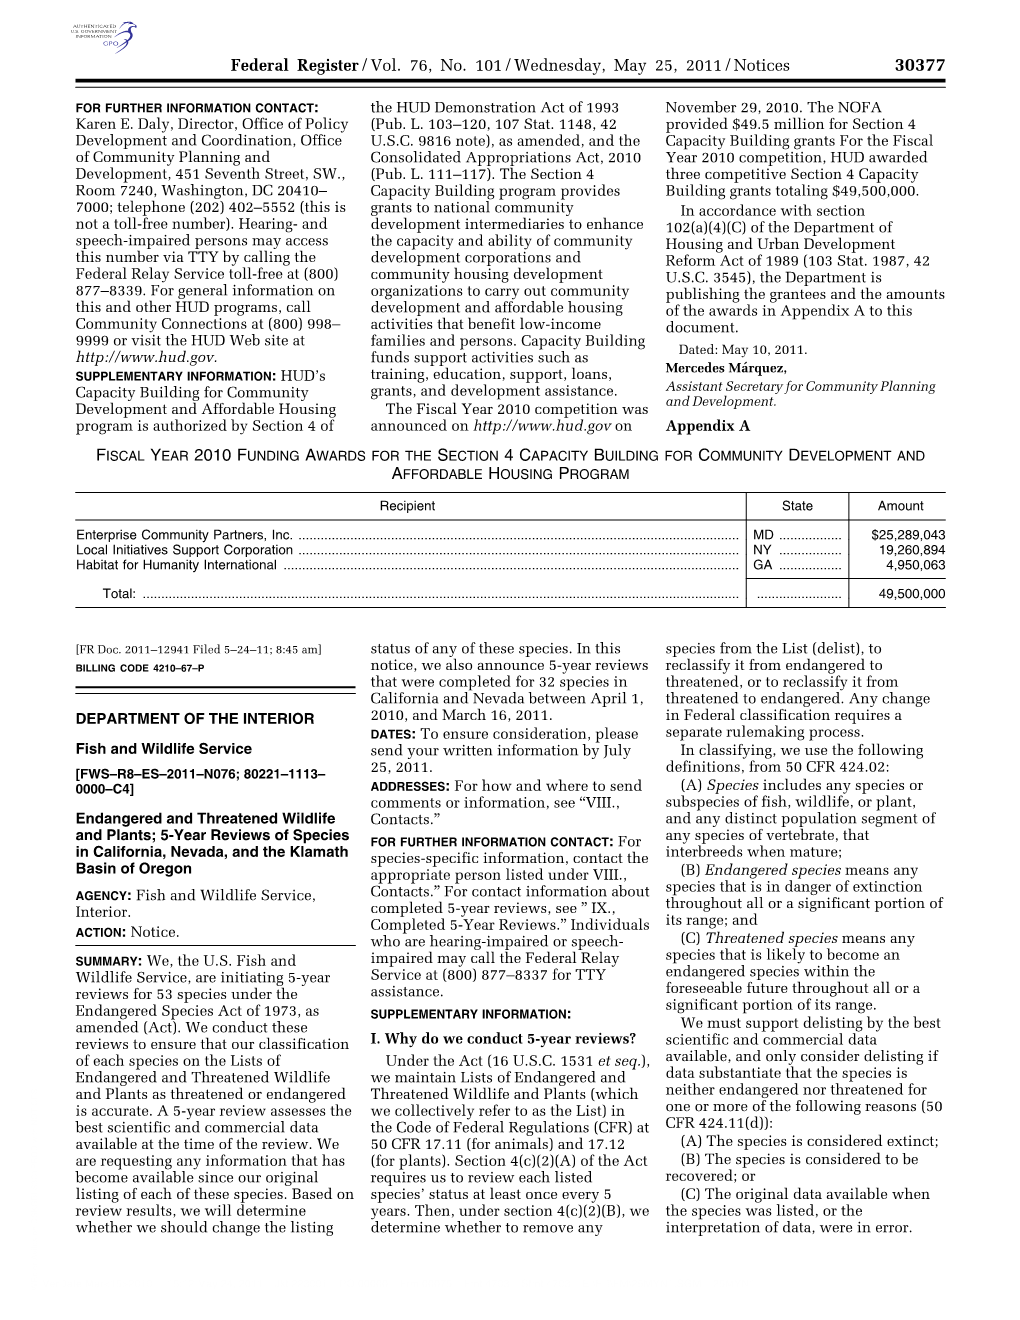 Federal Register/Vol. 76, No. 101/Wednesday, May 25, 2011